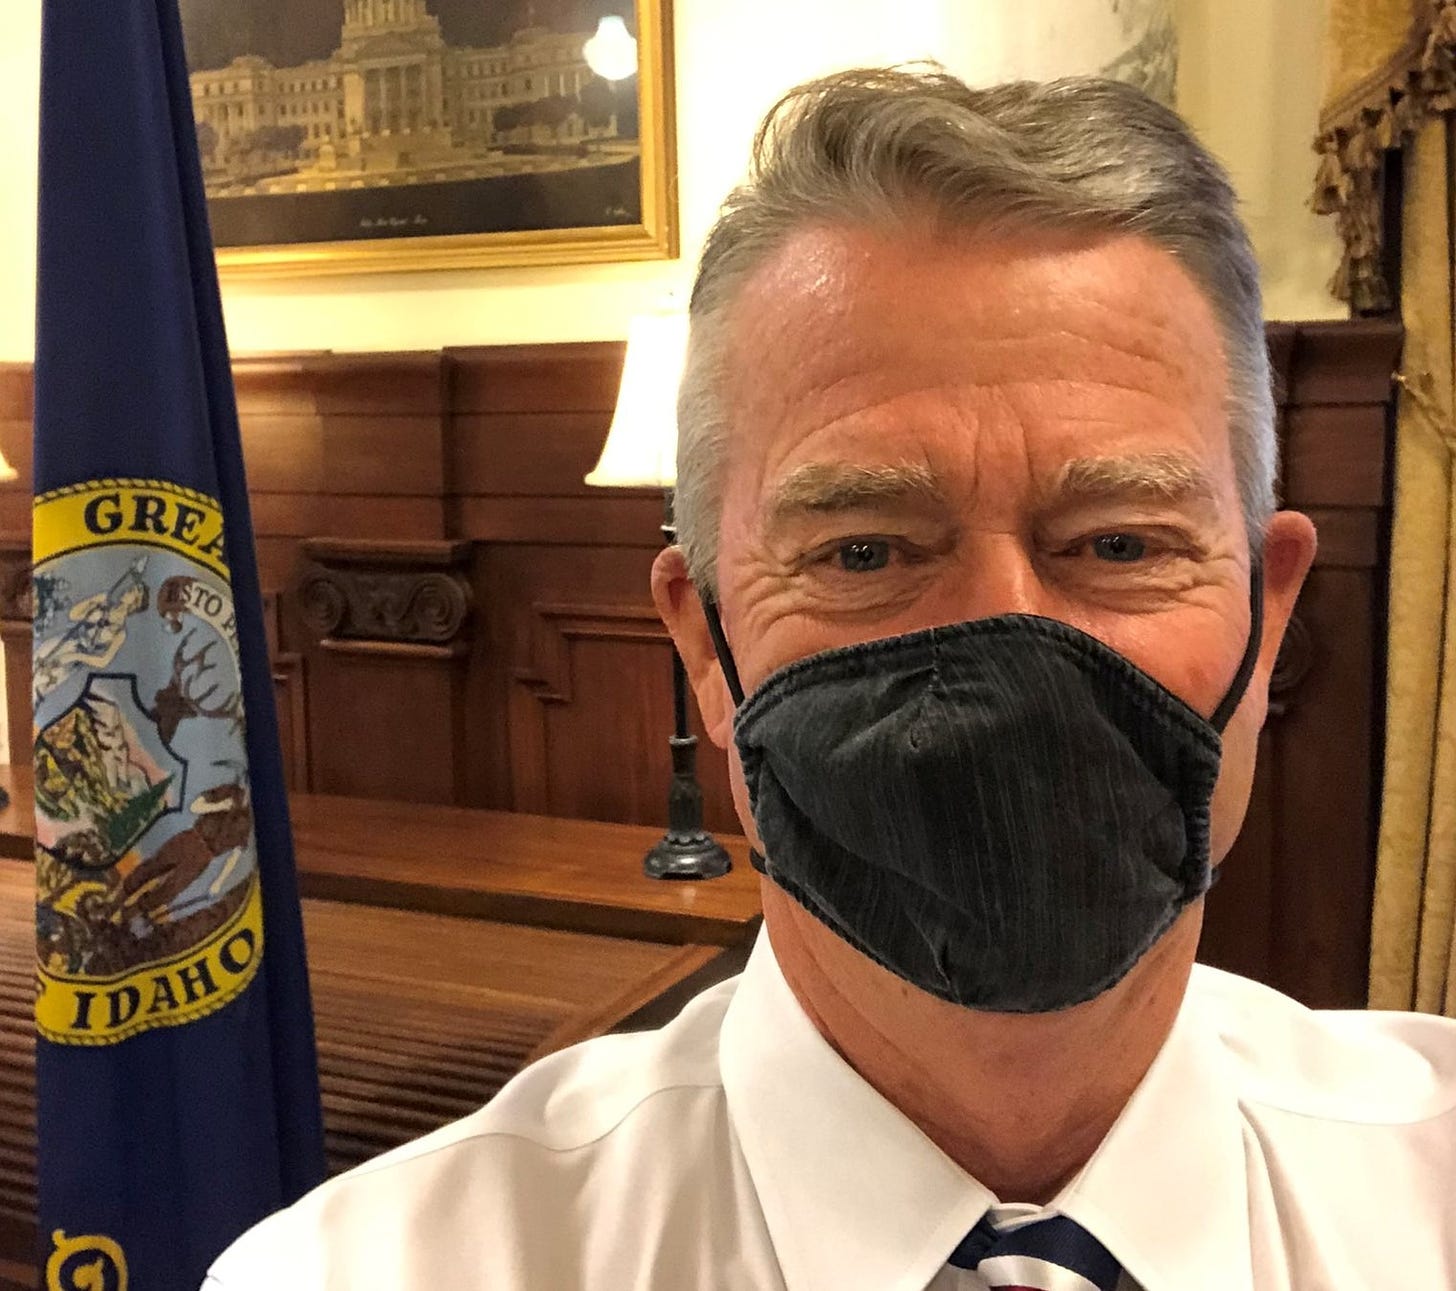 https://www.nwpb.org/wp-content/uploads/2020/07/Brad-Little-Facemask-CREDIT-Idaho-Governor-Twitter.jpeg